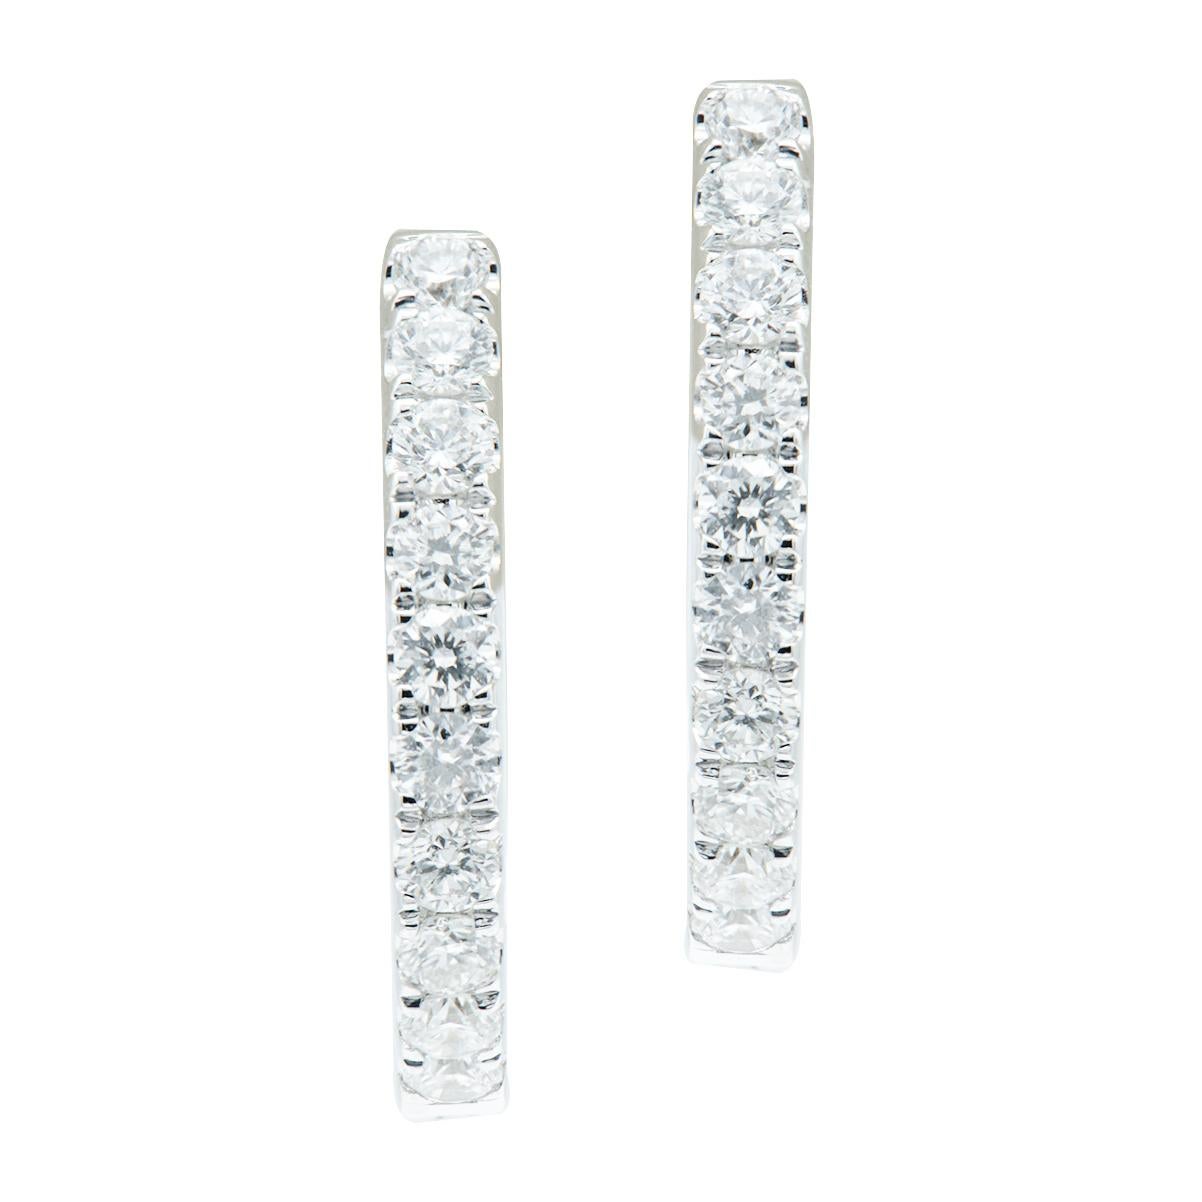 Beautiful and classic, these earrings will never go out of style and can be worn all the time or on special occasions. There are 24 round VS2, G color diamonds totaling 0.27 carats which are set in 2.9 grams of 18 karat white gold. The post securely